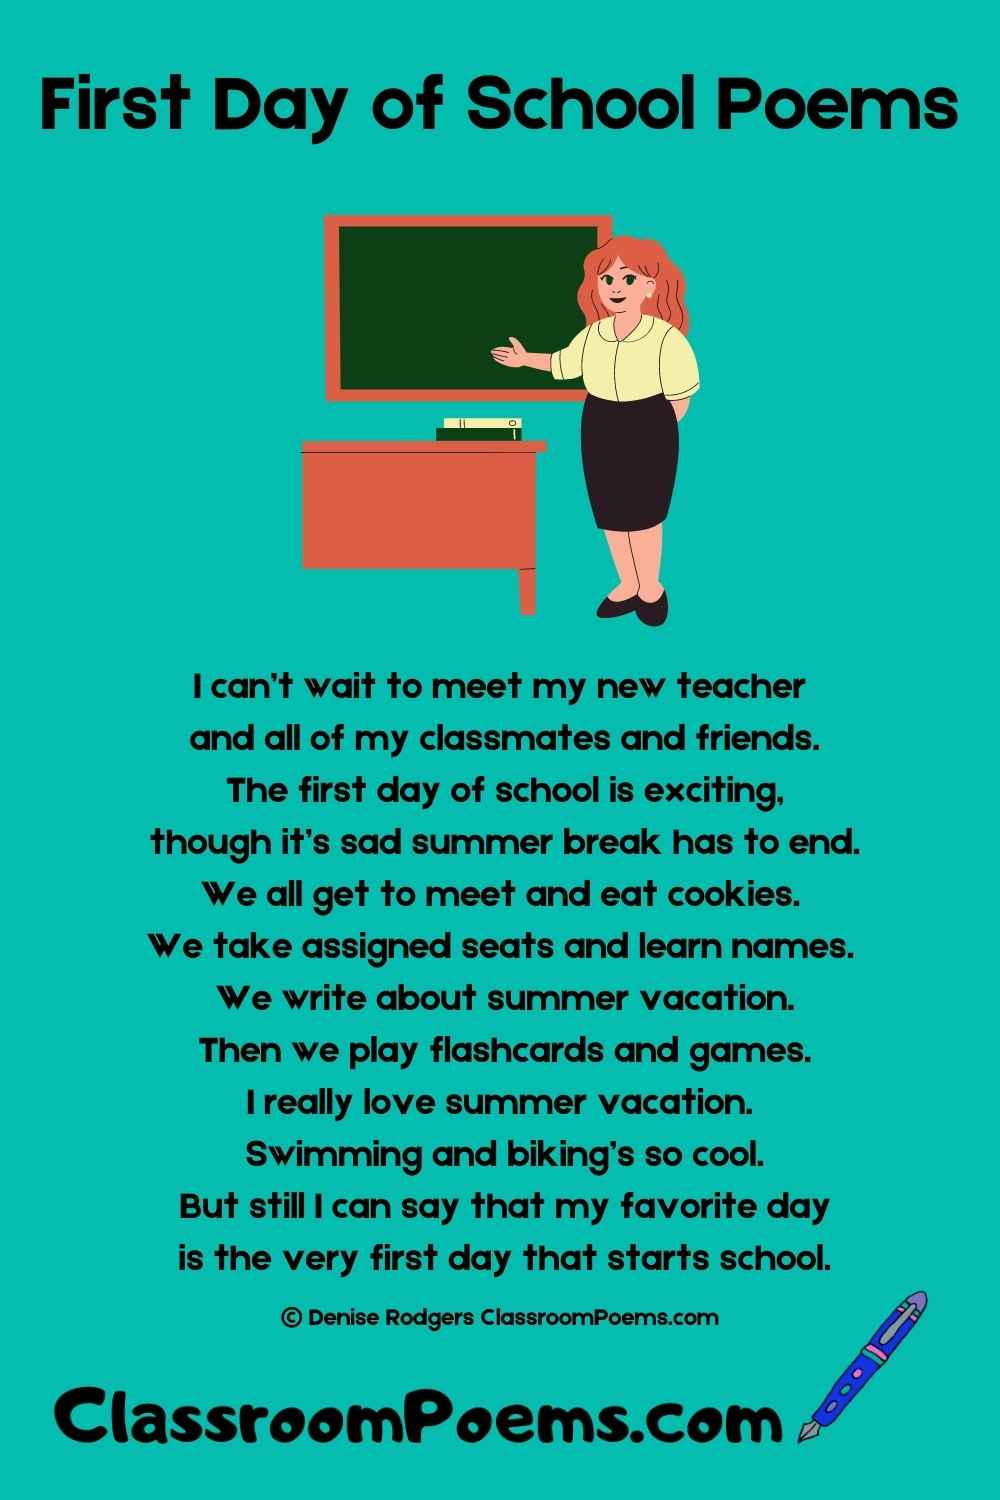 First Day of School Poems